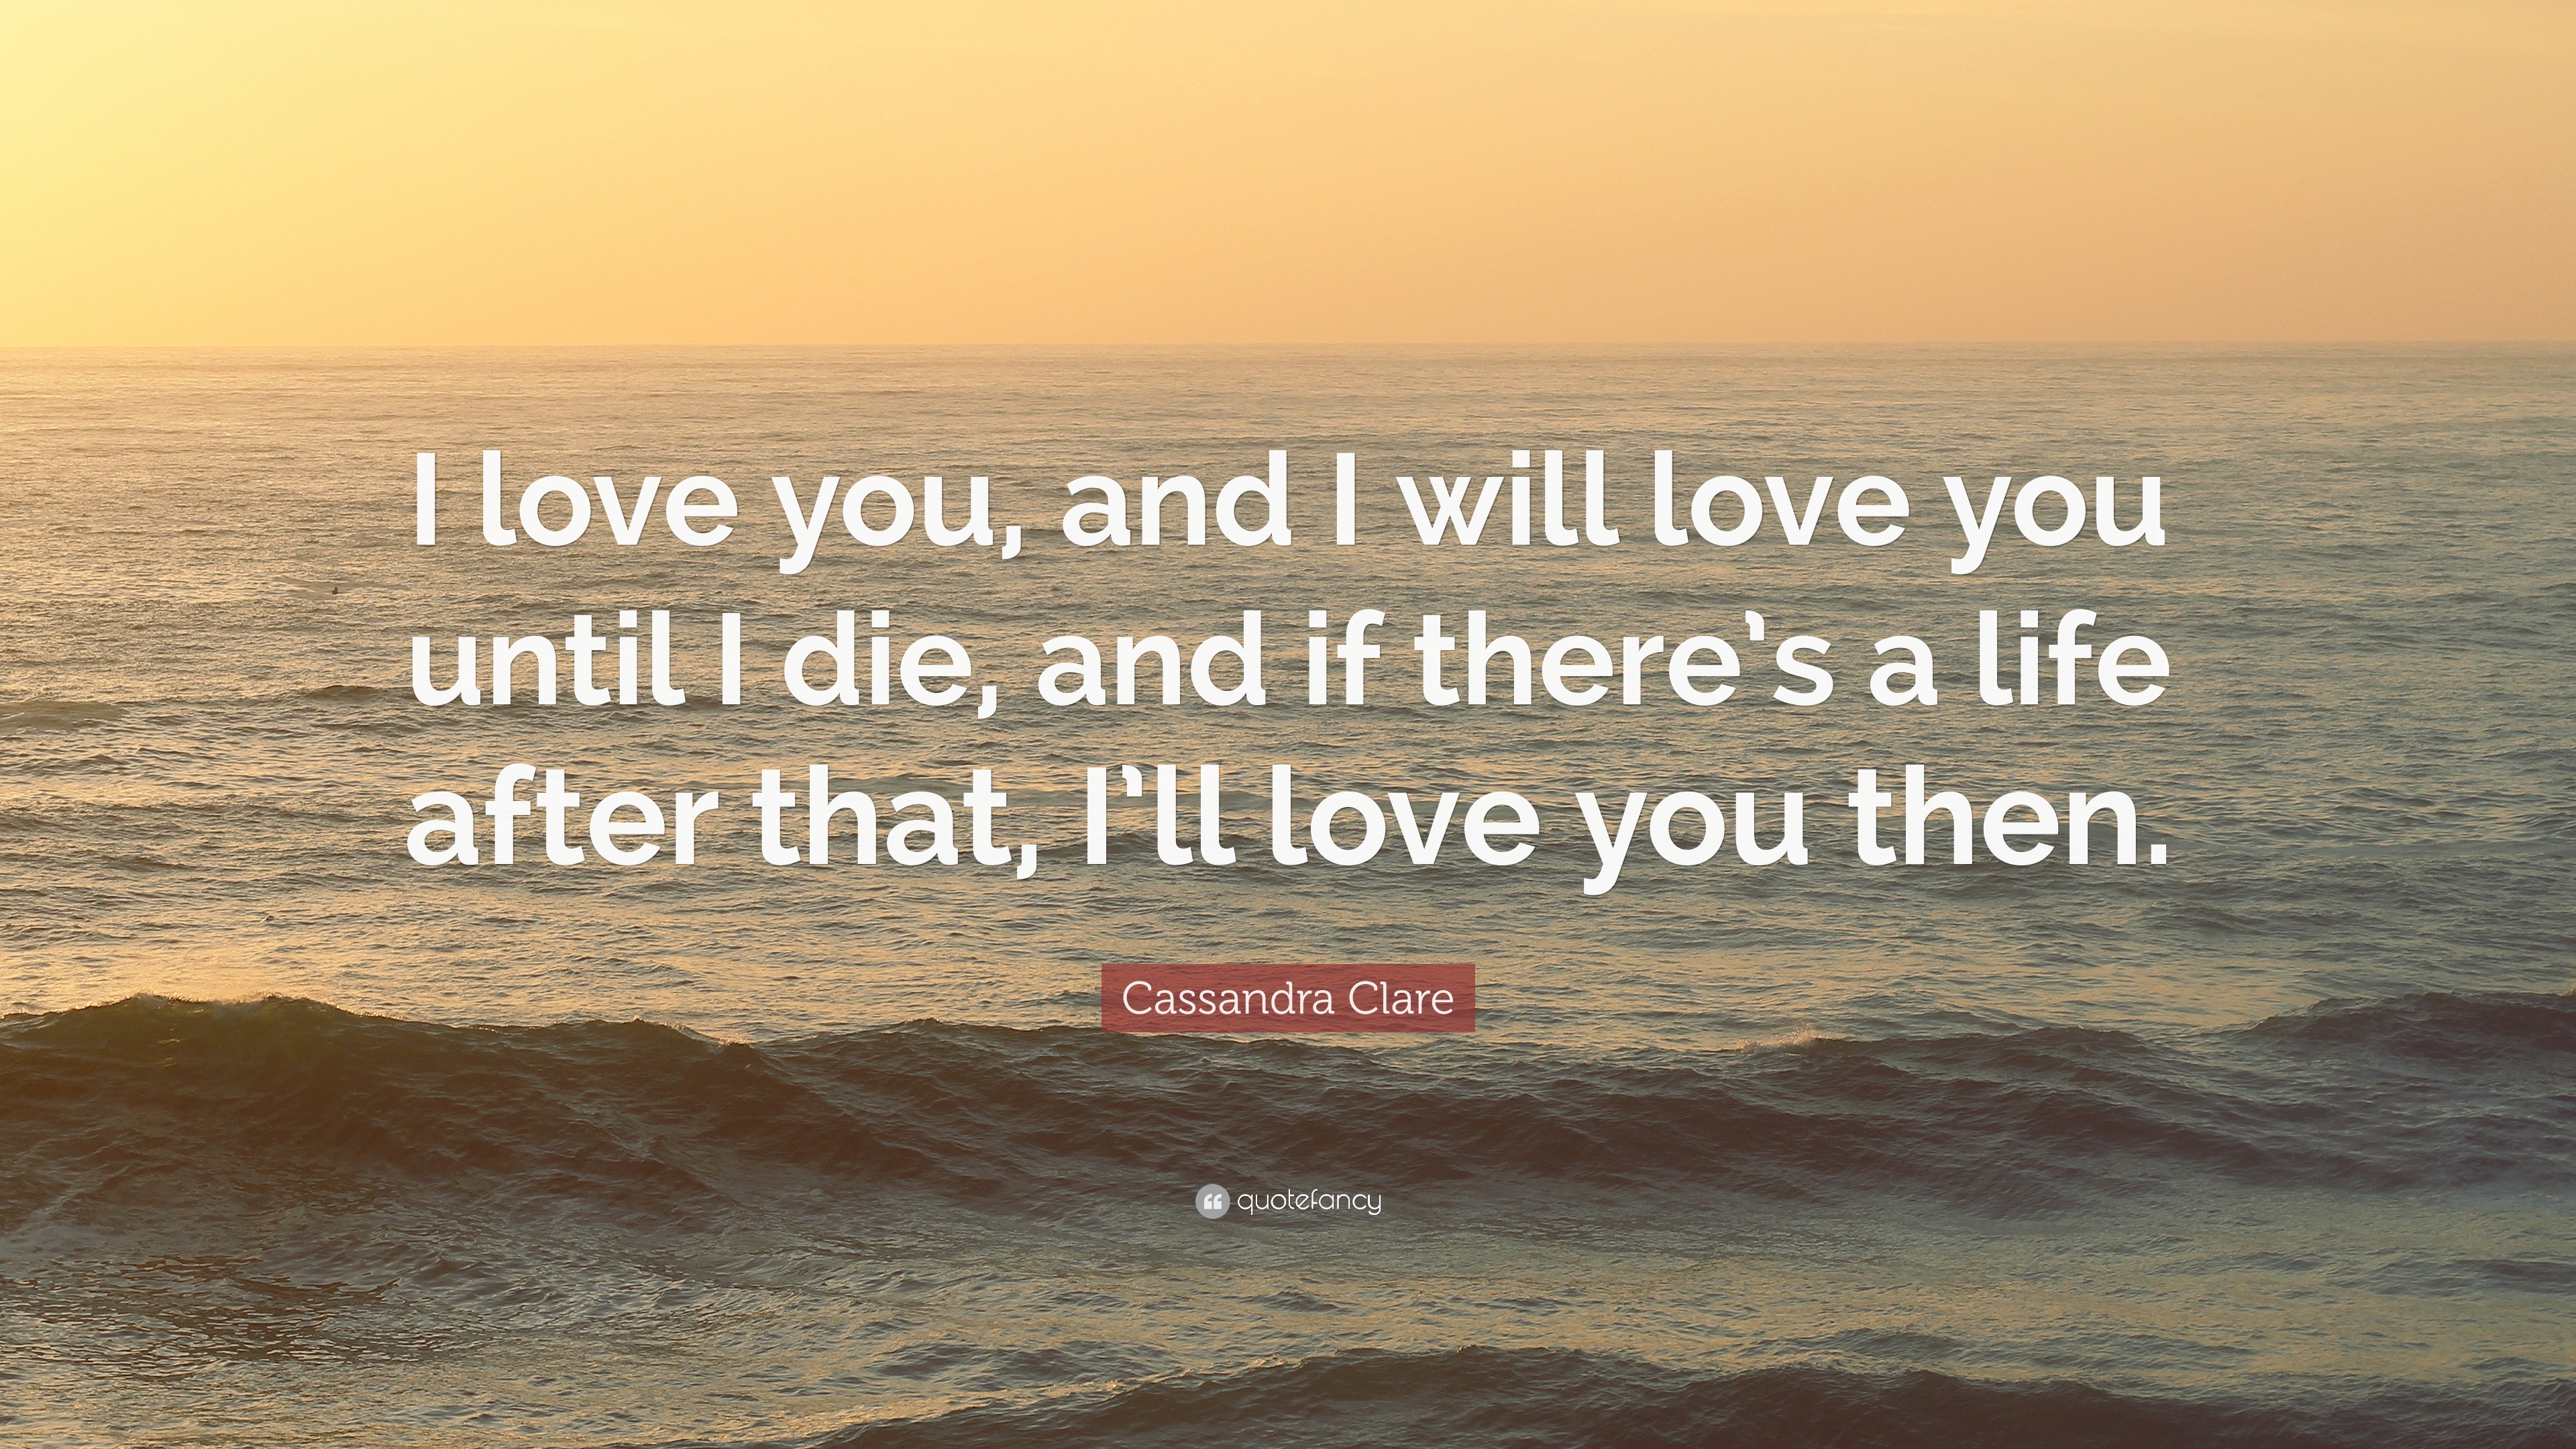 Cassandra Clare Quote “I love you and I will love you until I